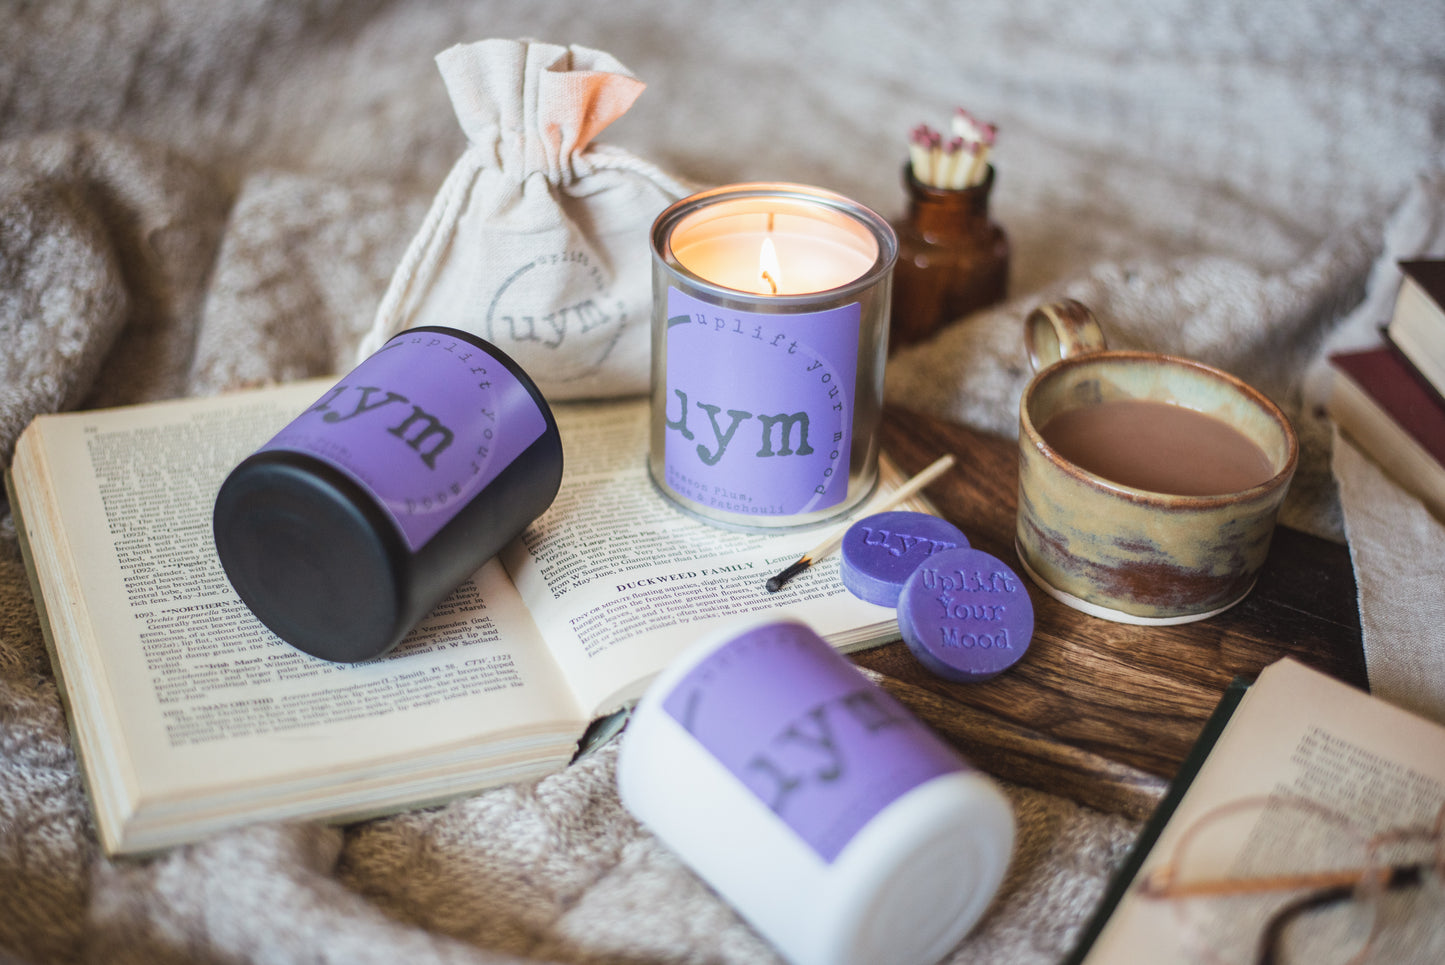 Damson Plum, Rose & Patchouli Candles, highly sceted natural wax, organic cotton wick, metallic tin lighted candle, matt black, matt white glass jar candles, cosy background. Uplift Your Mood Scents